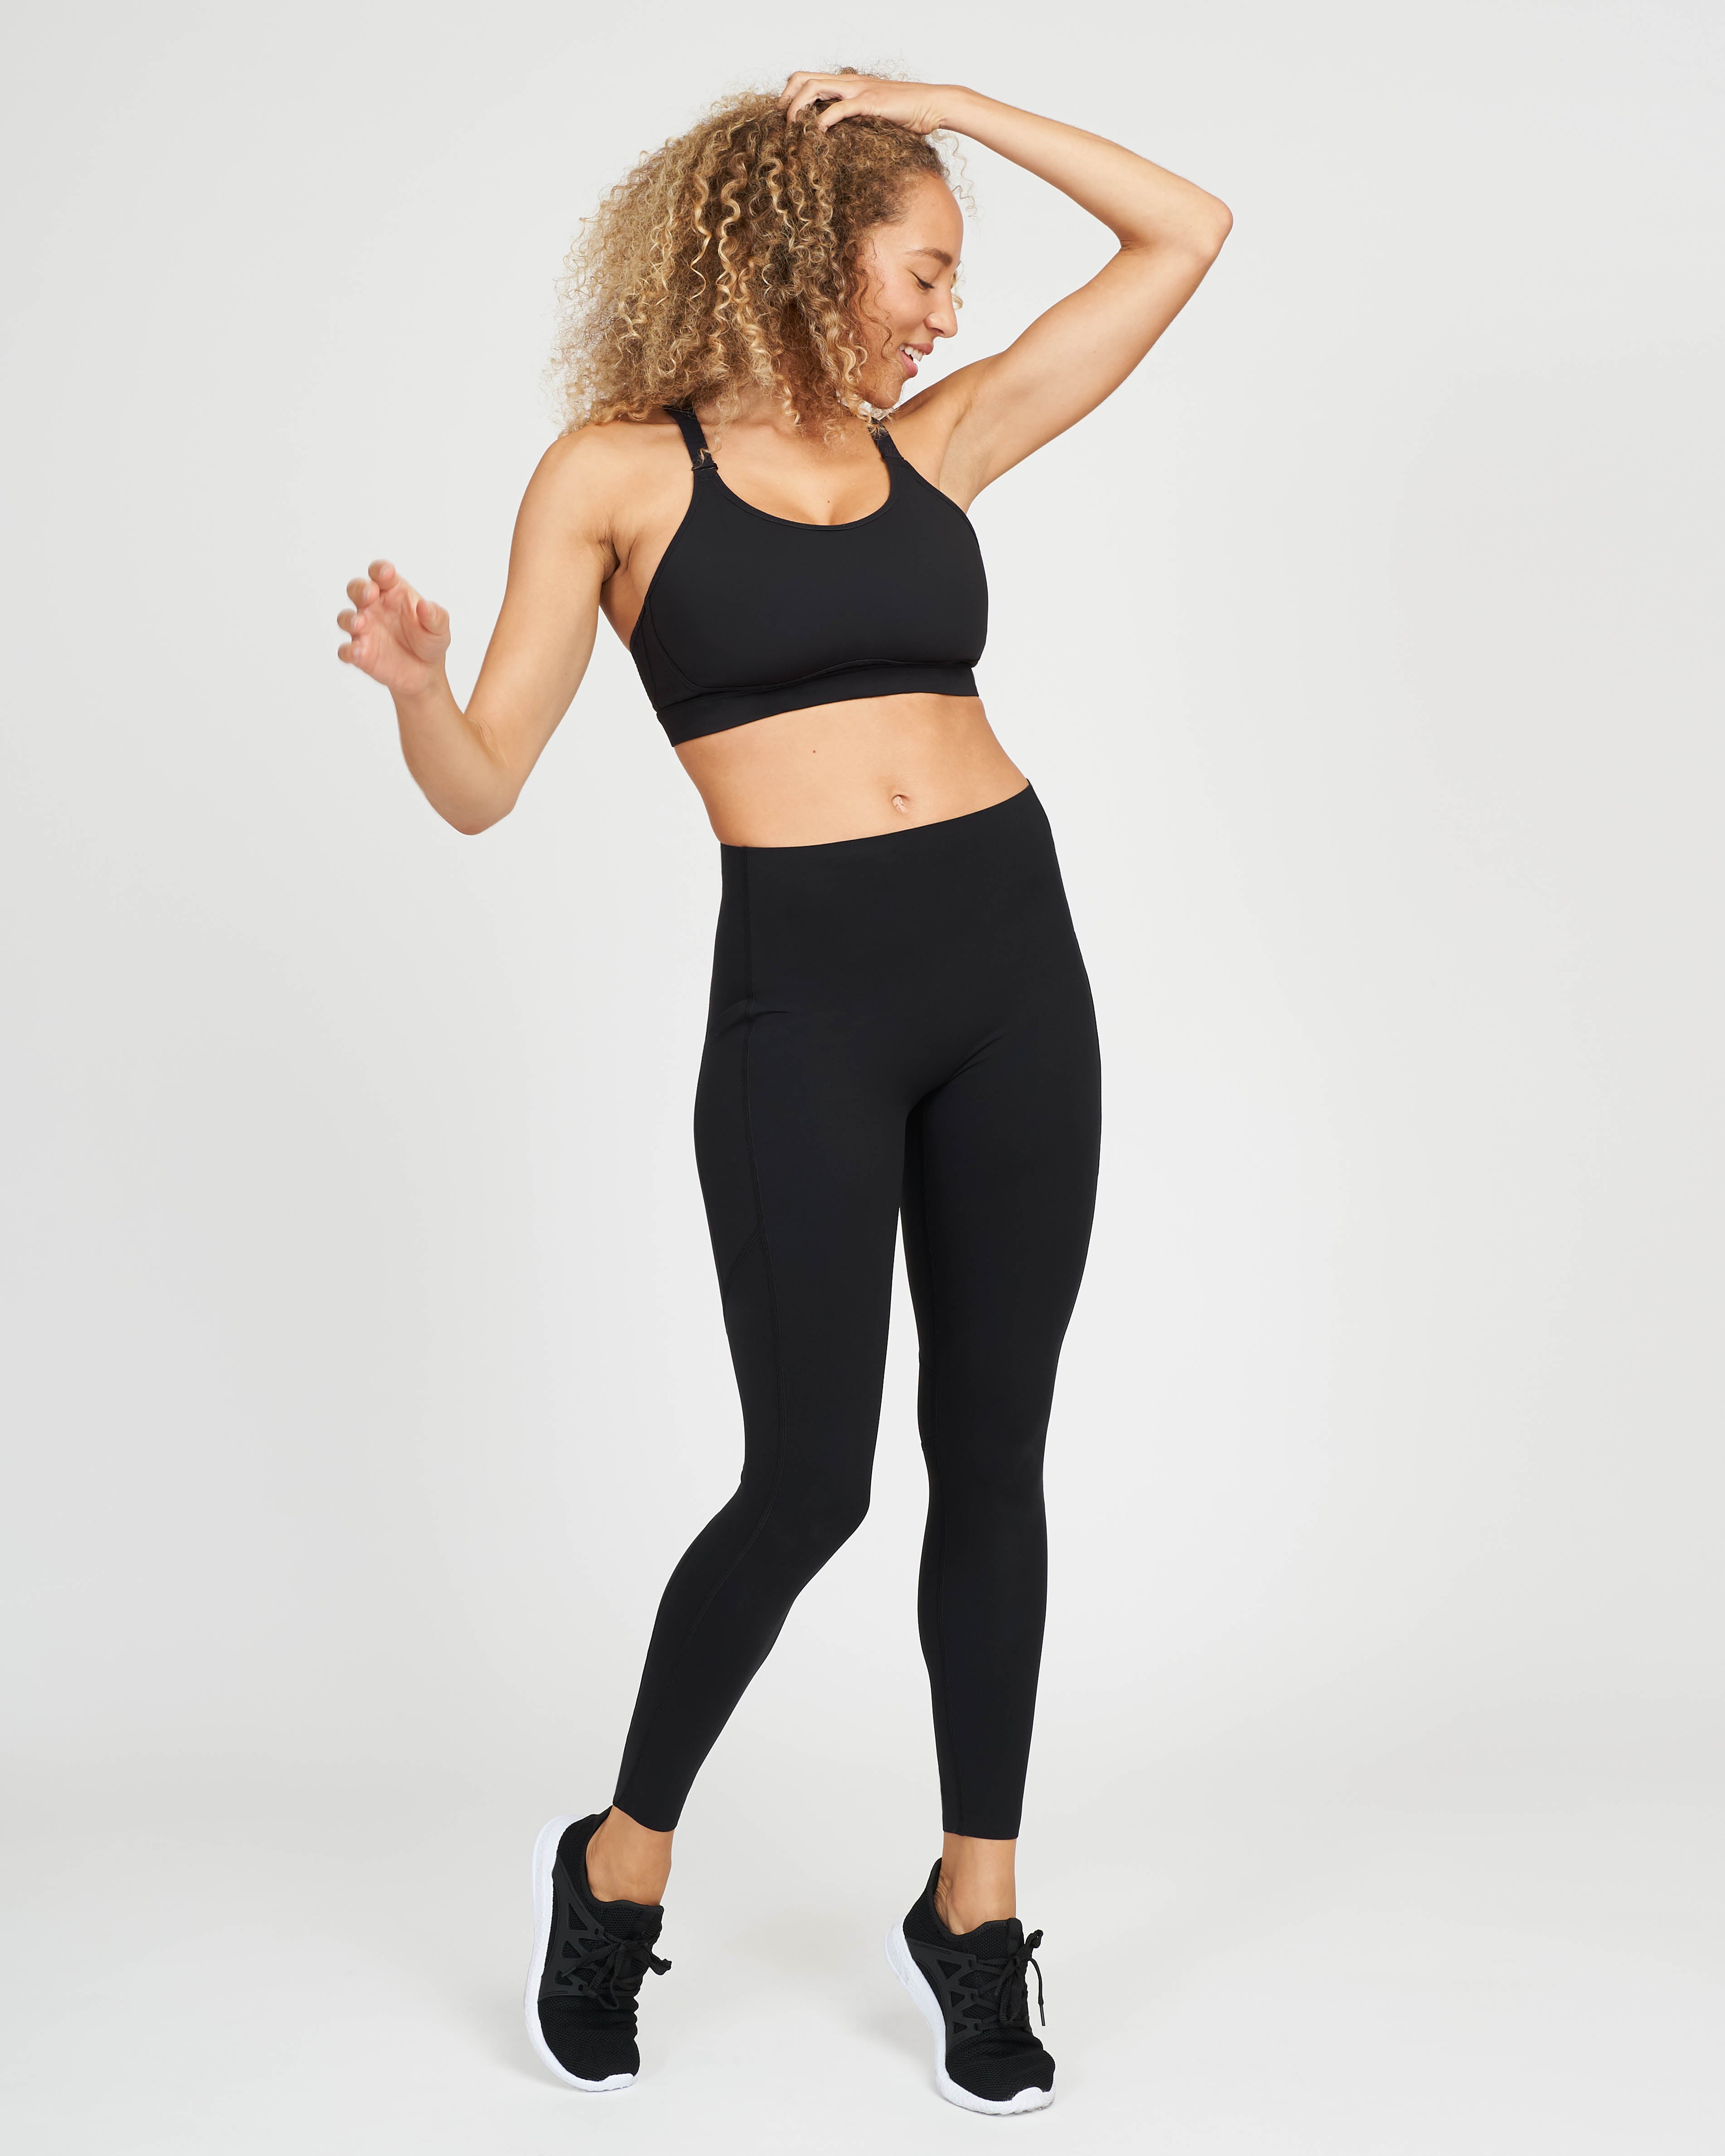 Spanx Leggings Are on Sale, and We Want Them All